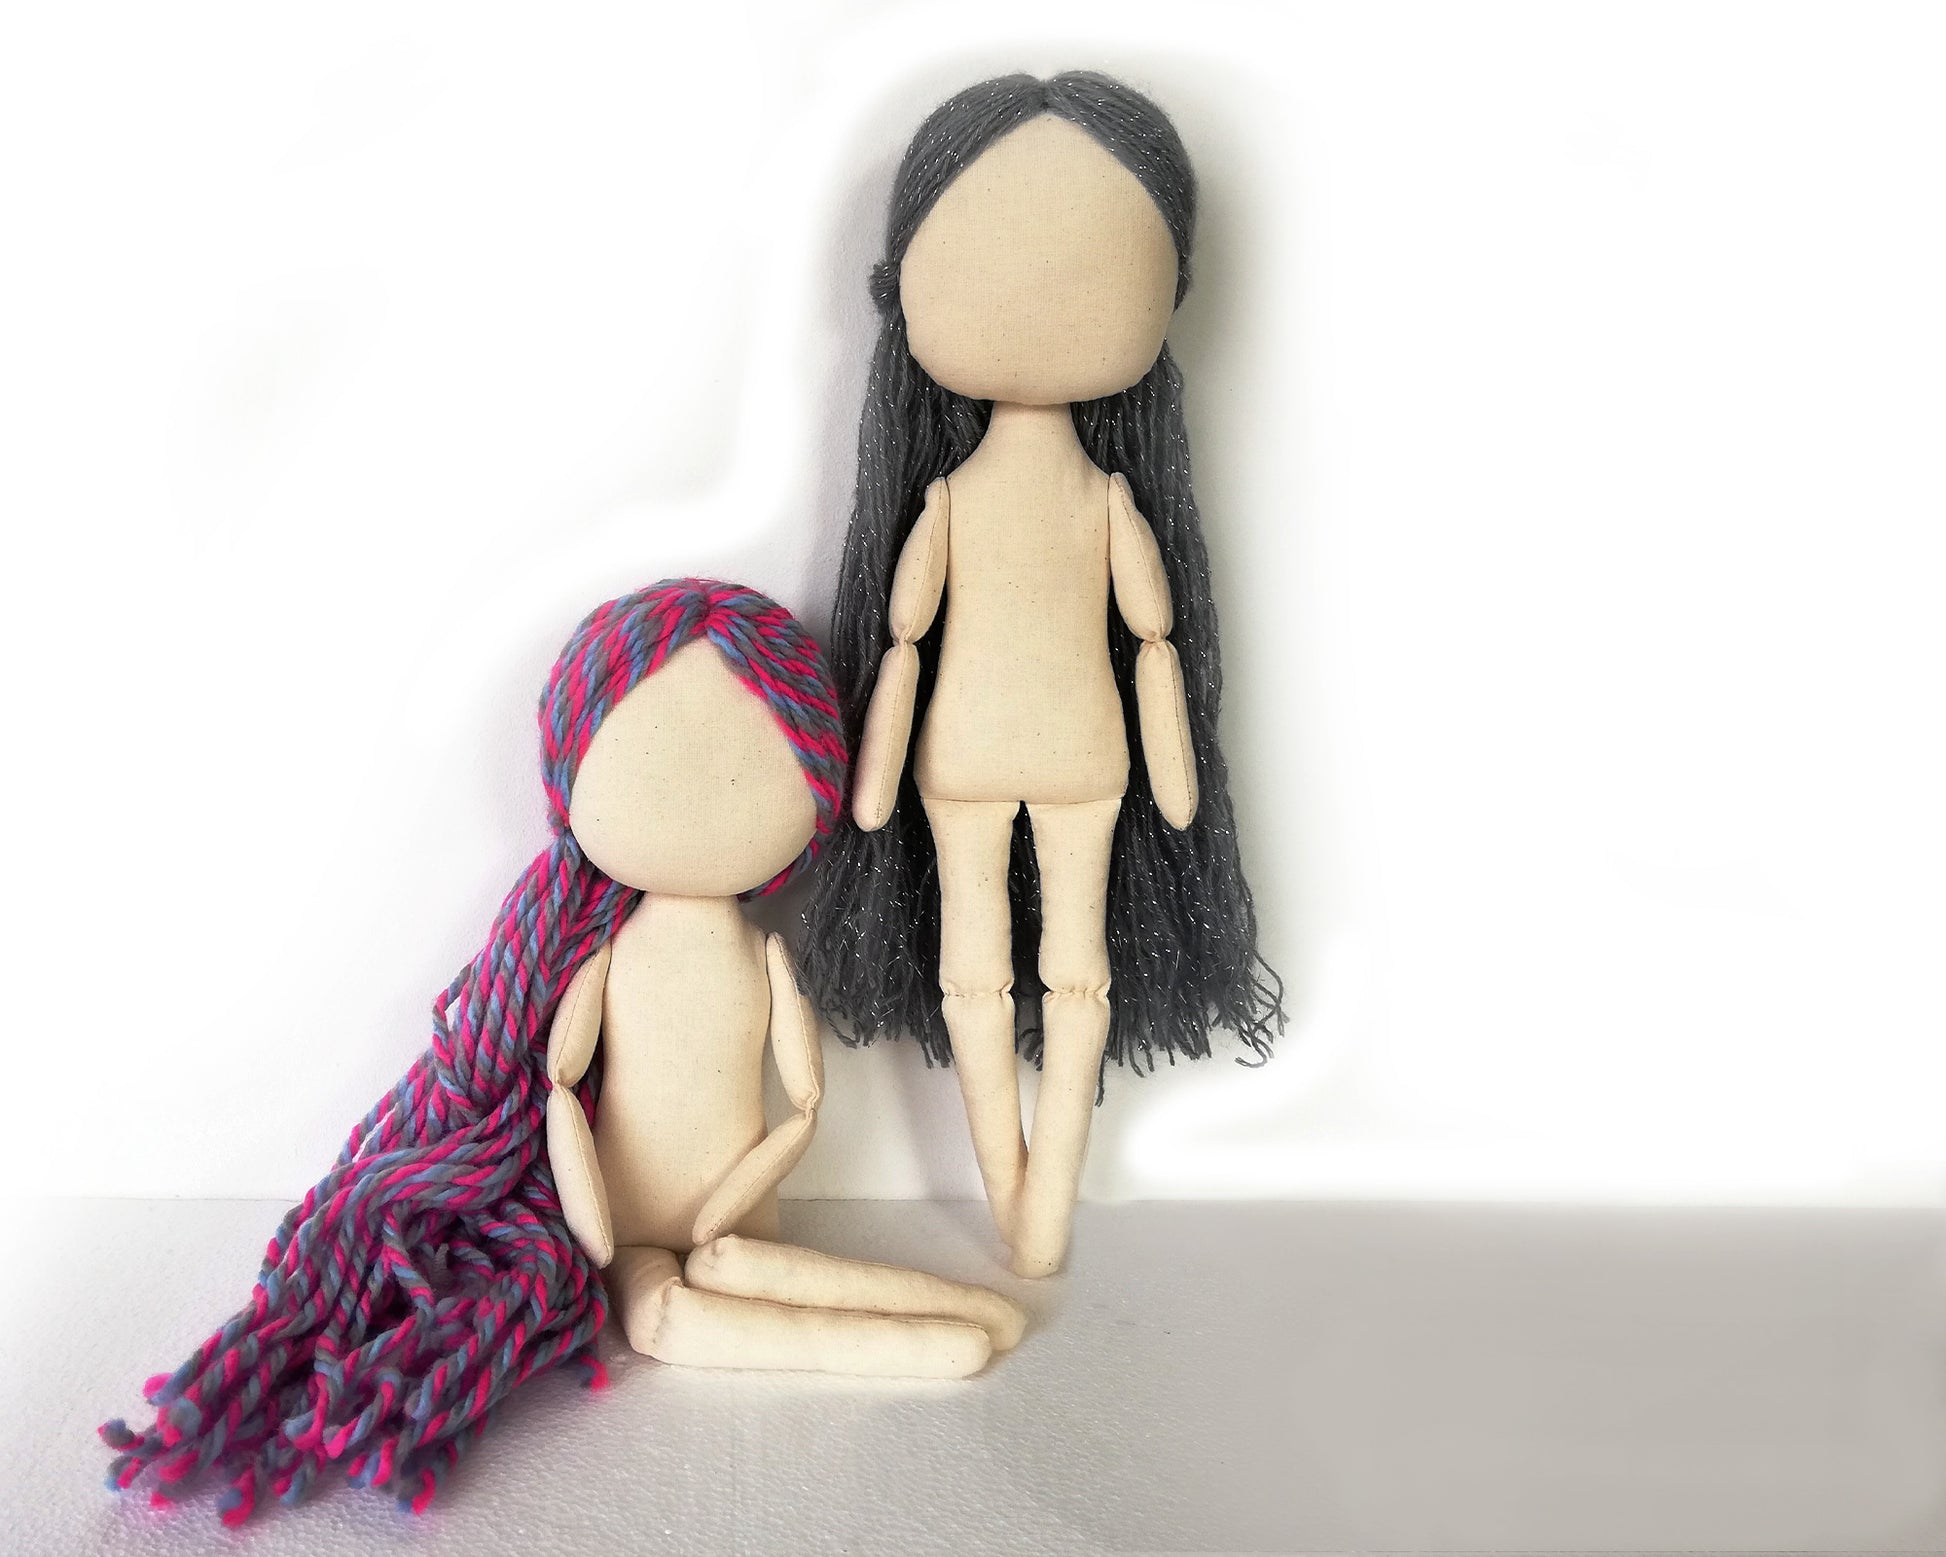 Doll Body 17 inch - PDF doll sewing pattern and tutorial